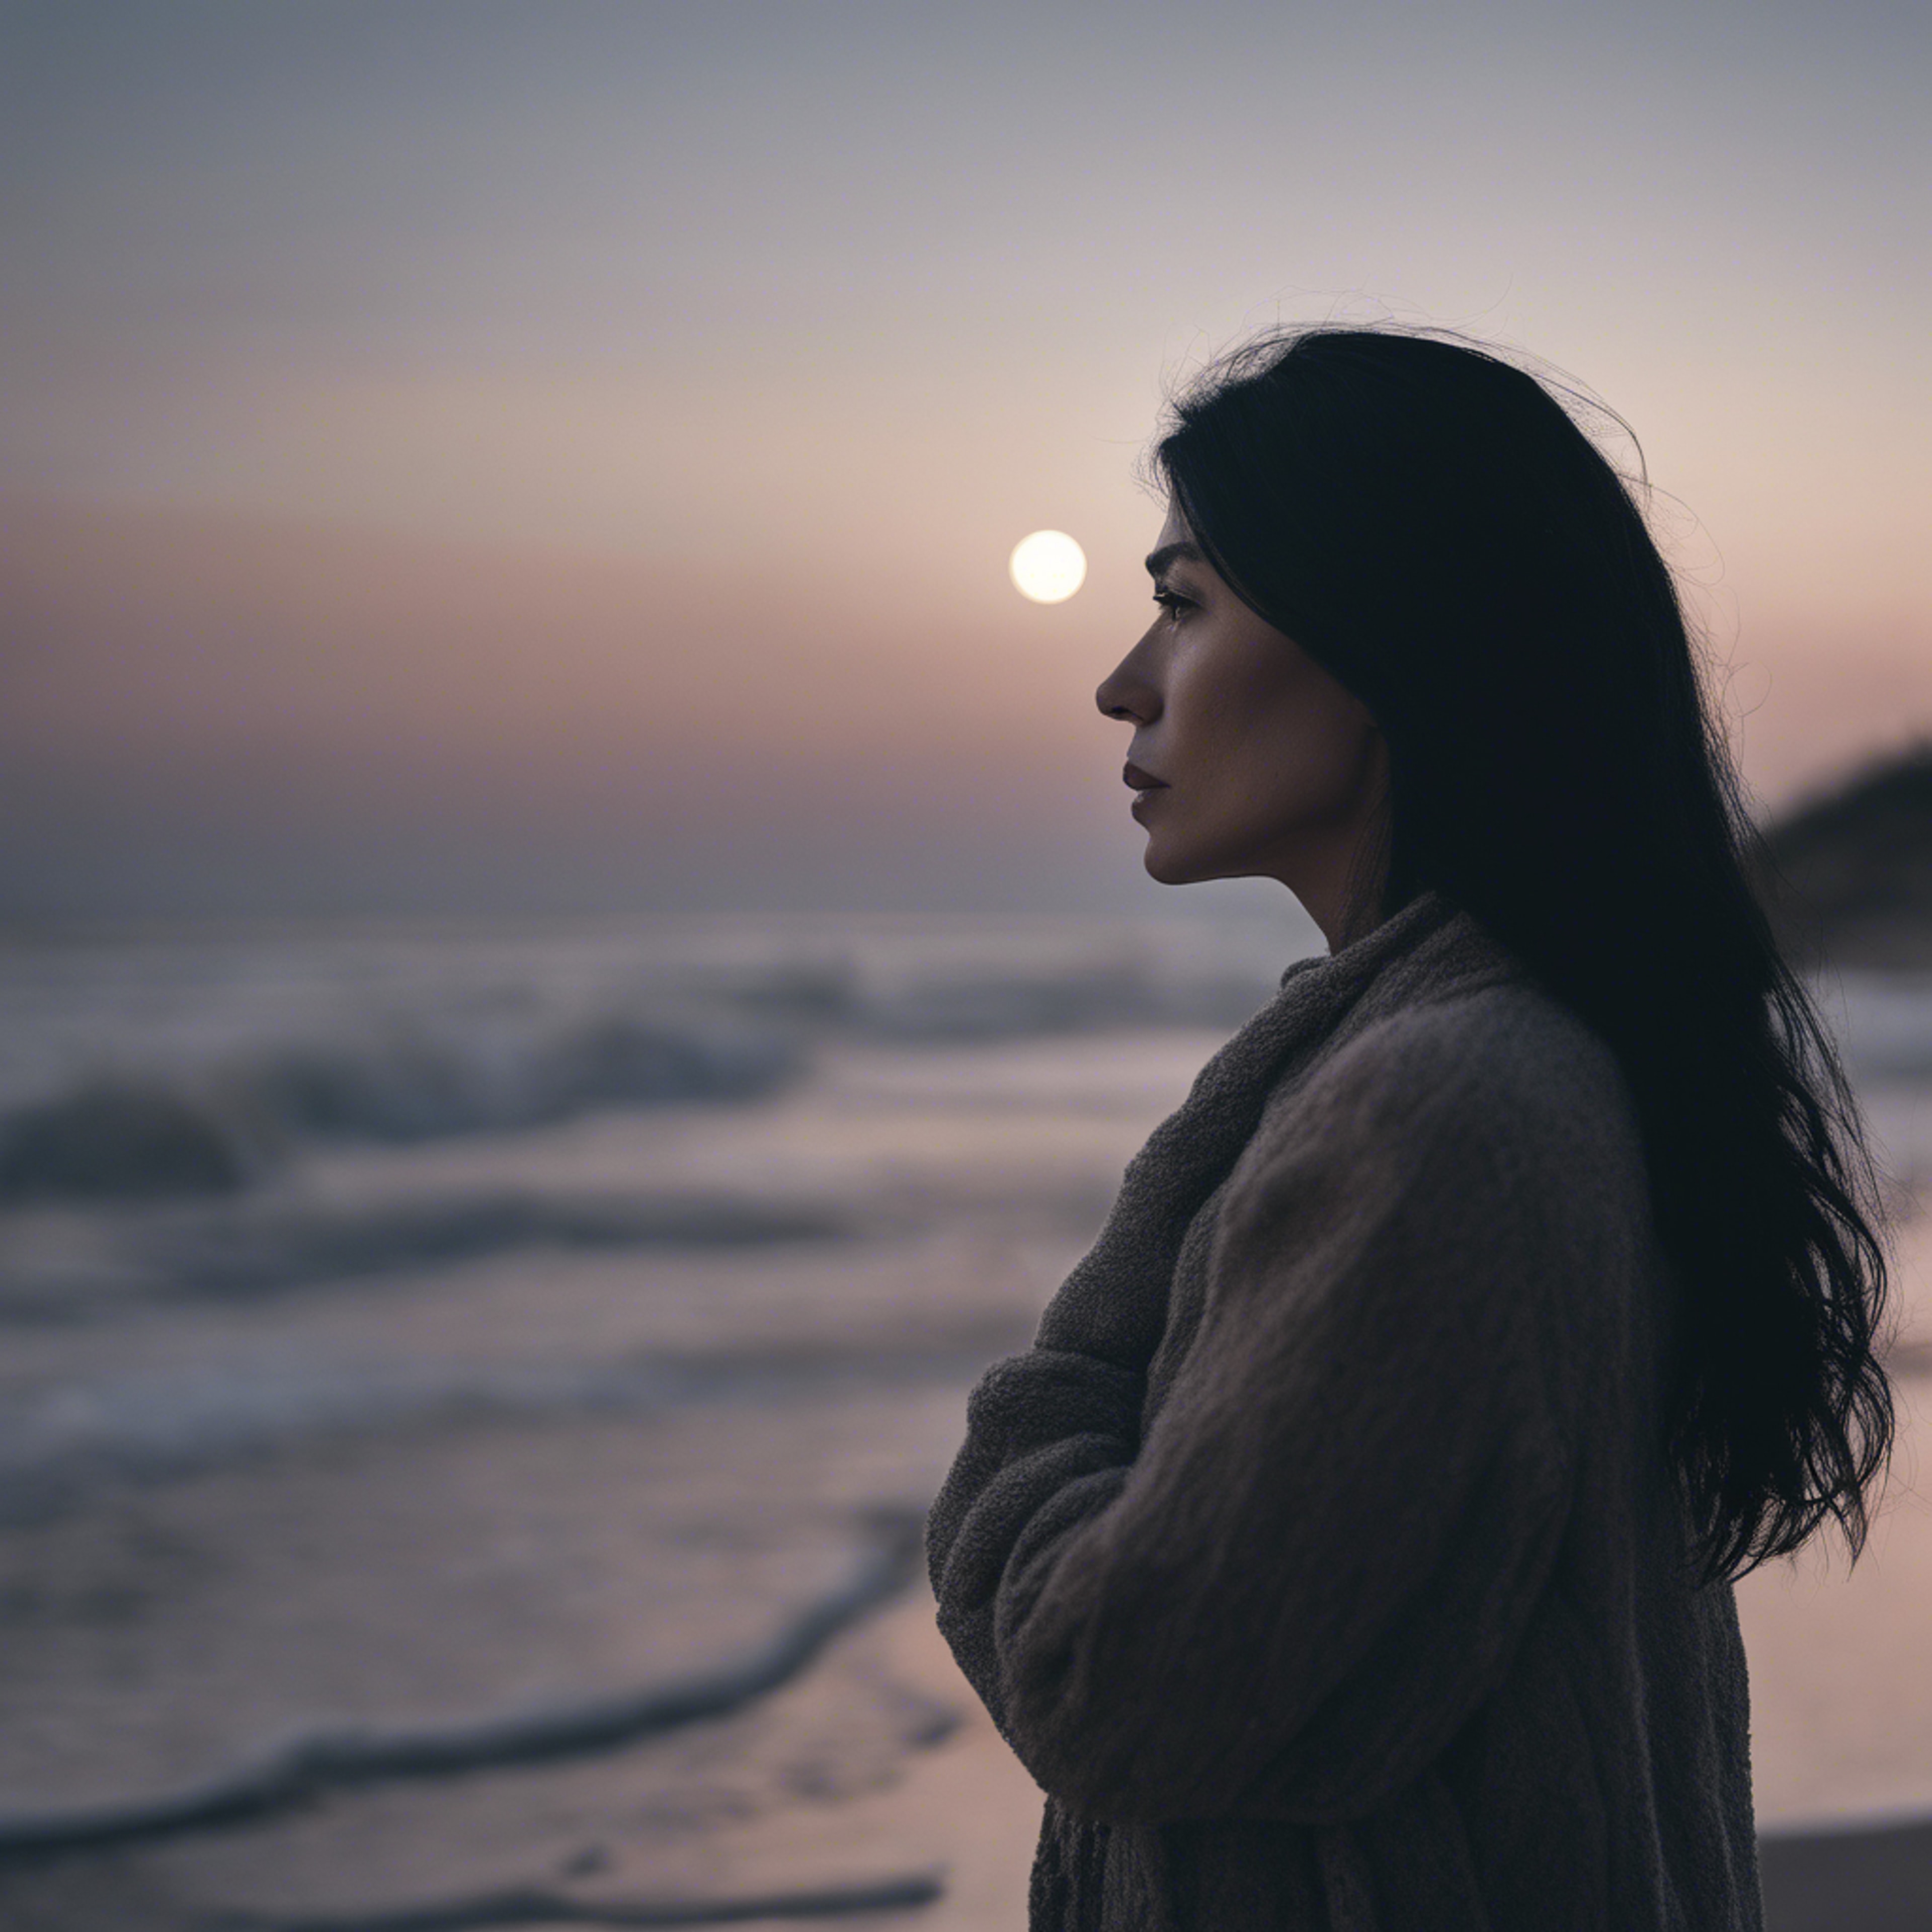 A mysterious women with graying black hair contemplating at a moonlit beach. Wallpaper[20ae0a0f0d9247969335]